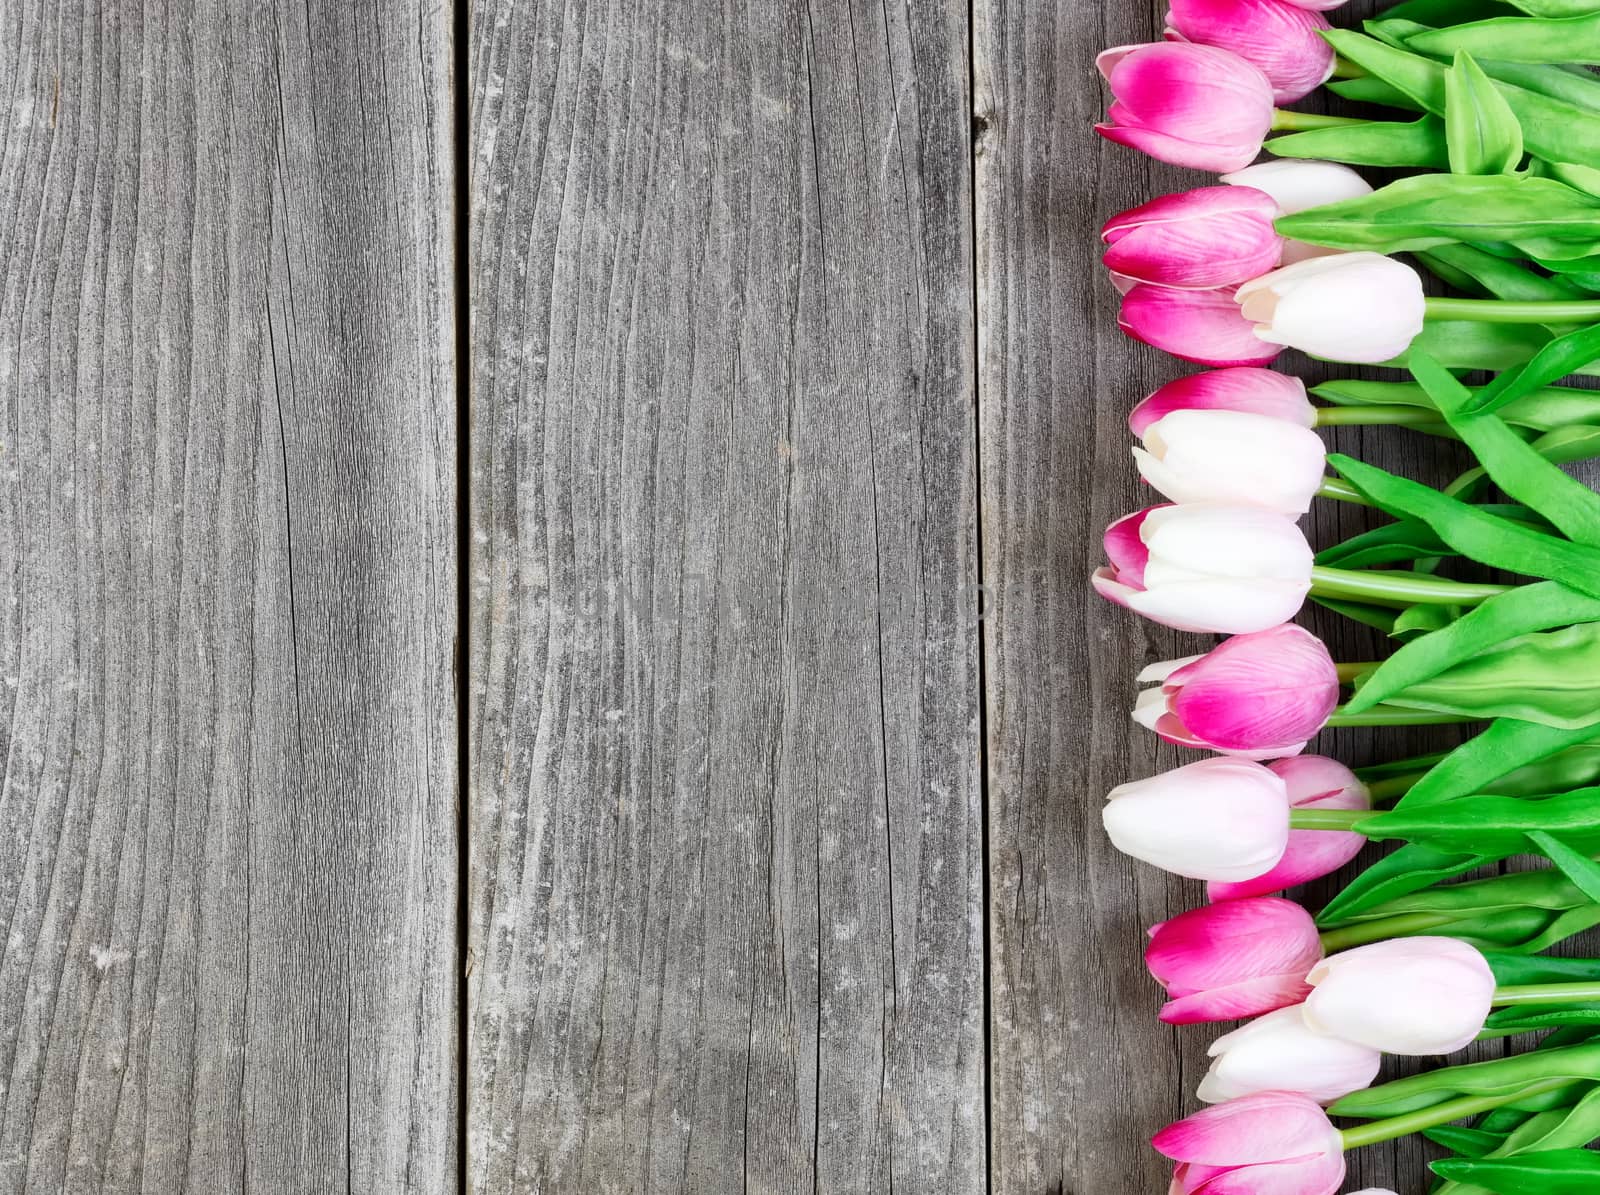 Tulips on vintage wooden planks for Easter Background  by tab1962